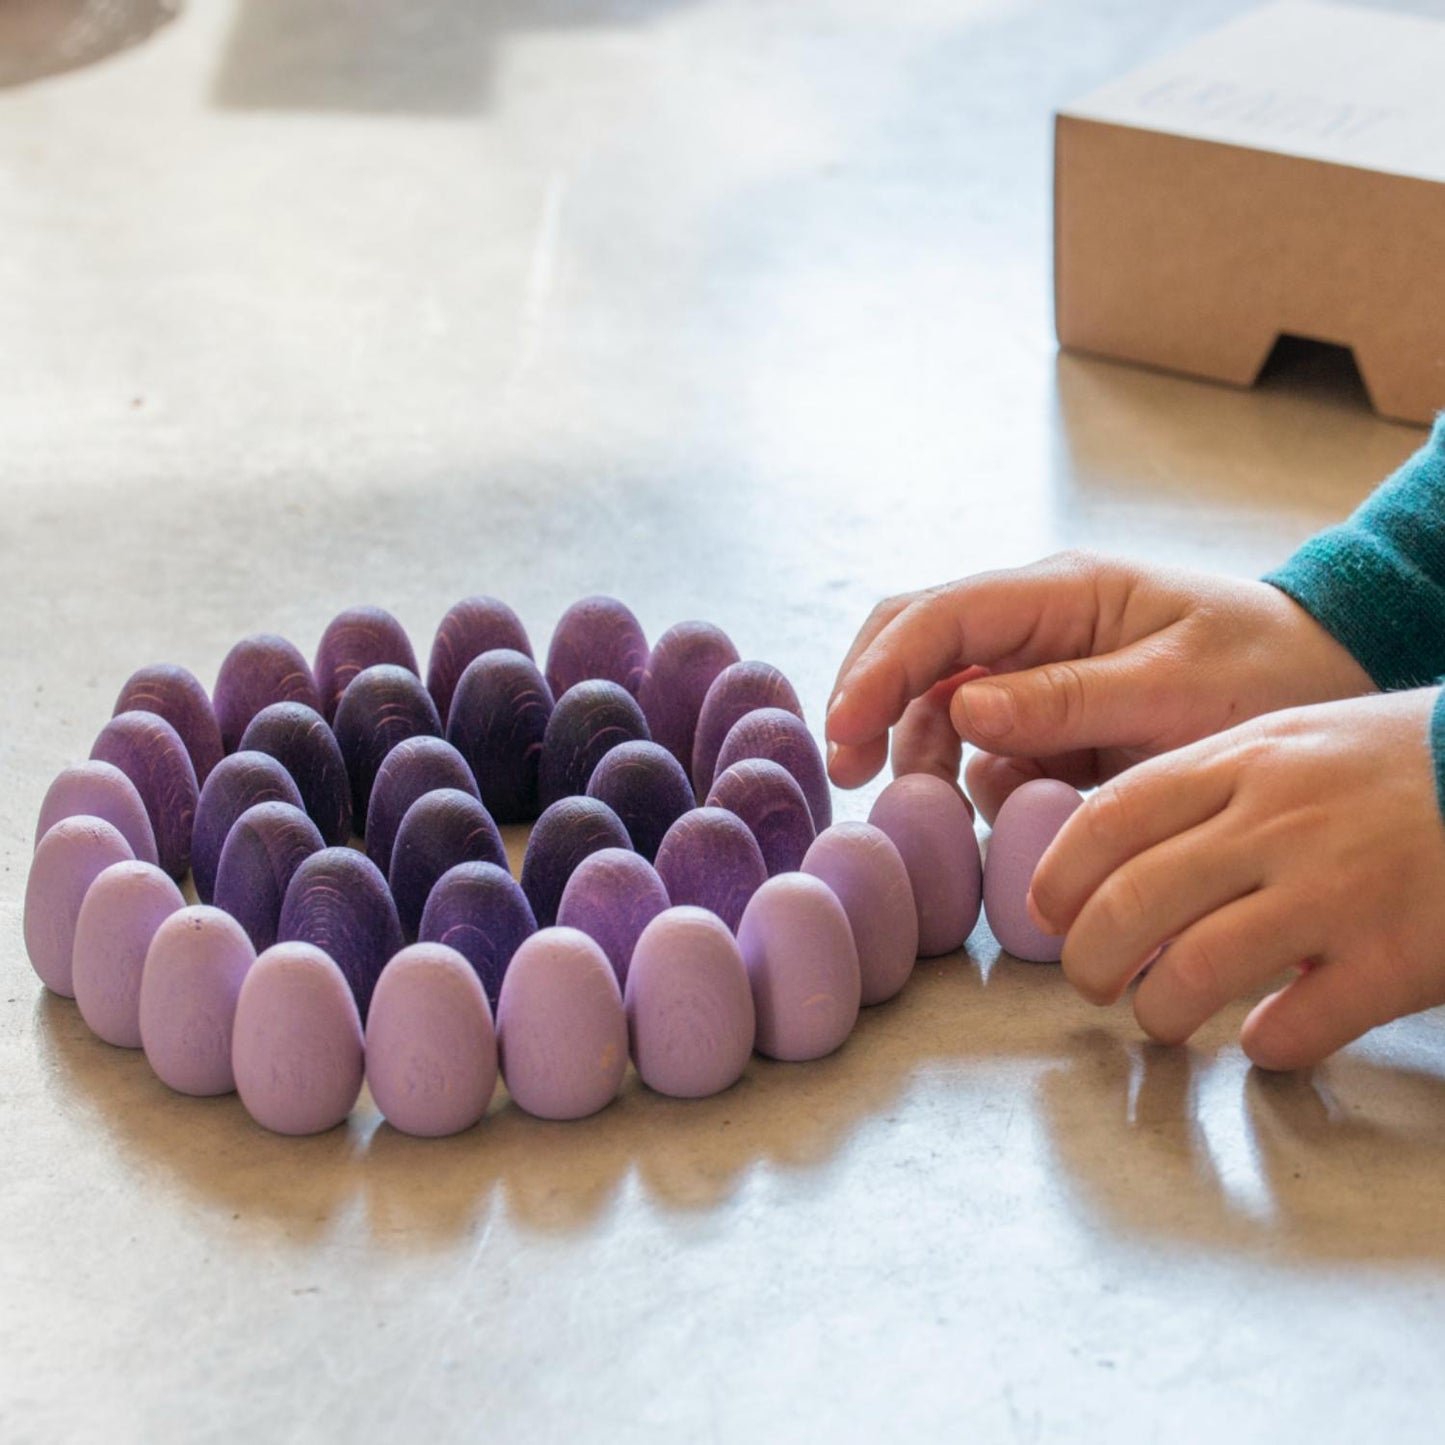 Mandala Eggs | 36 Pieces | Wooden Toys for Kids | Open-Ended Play